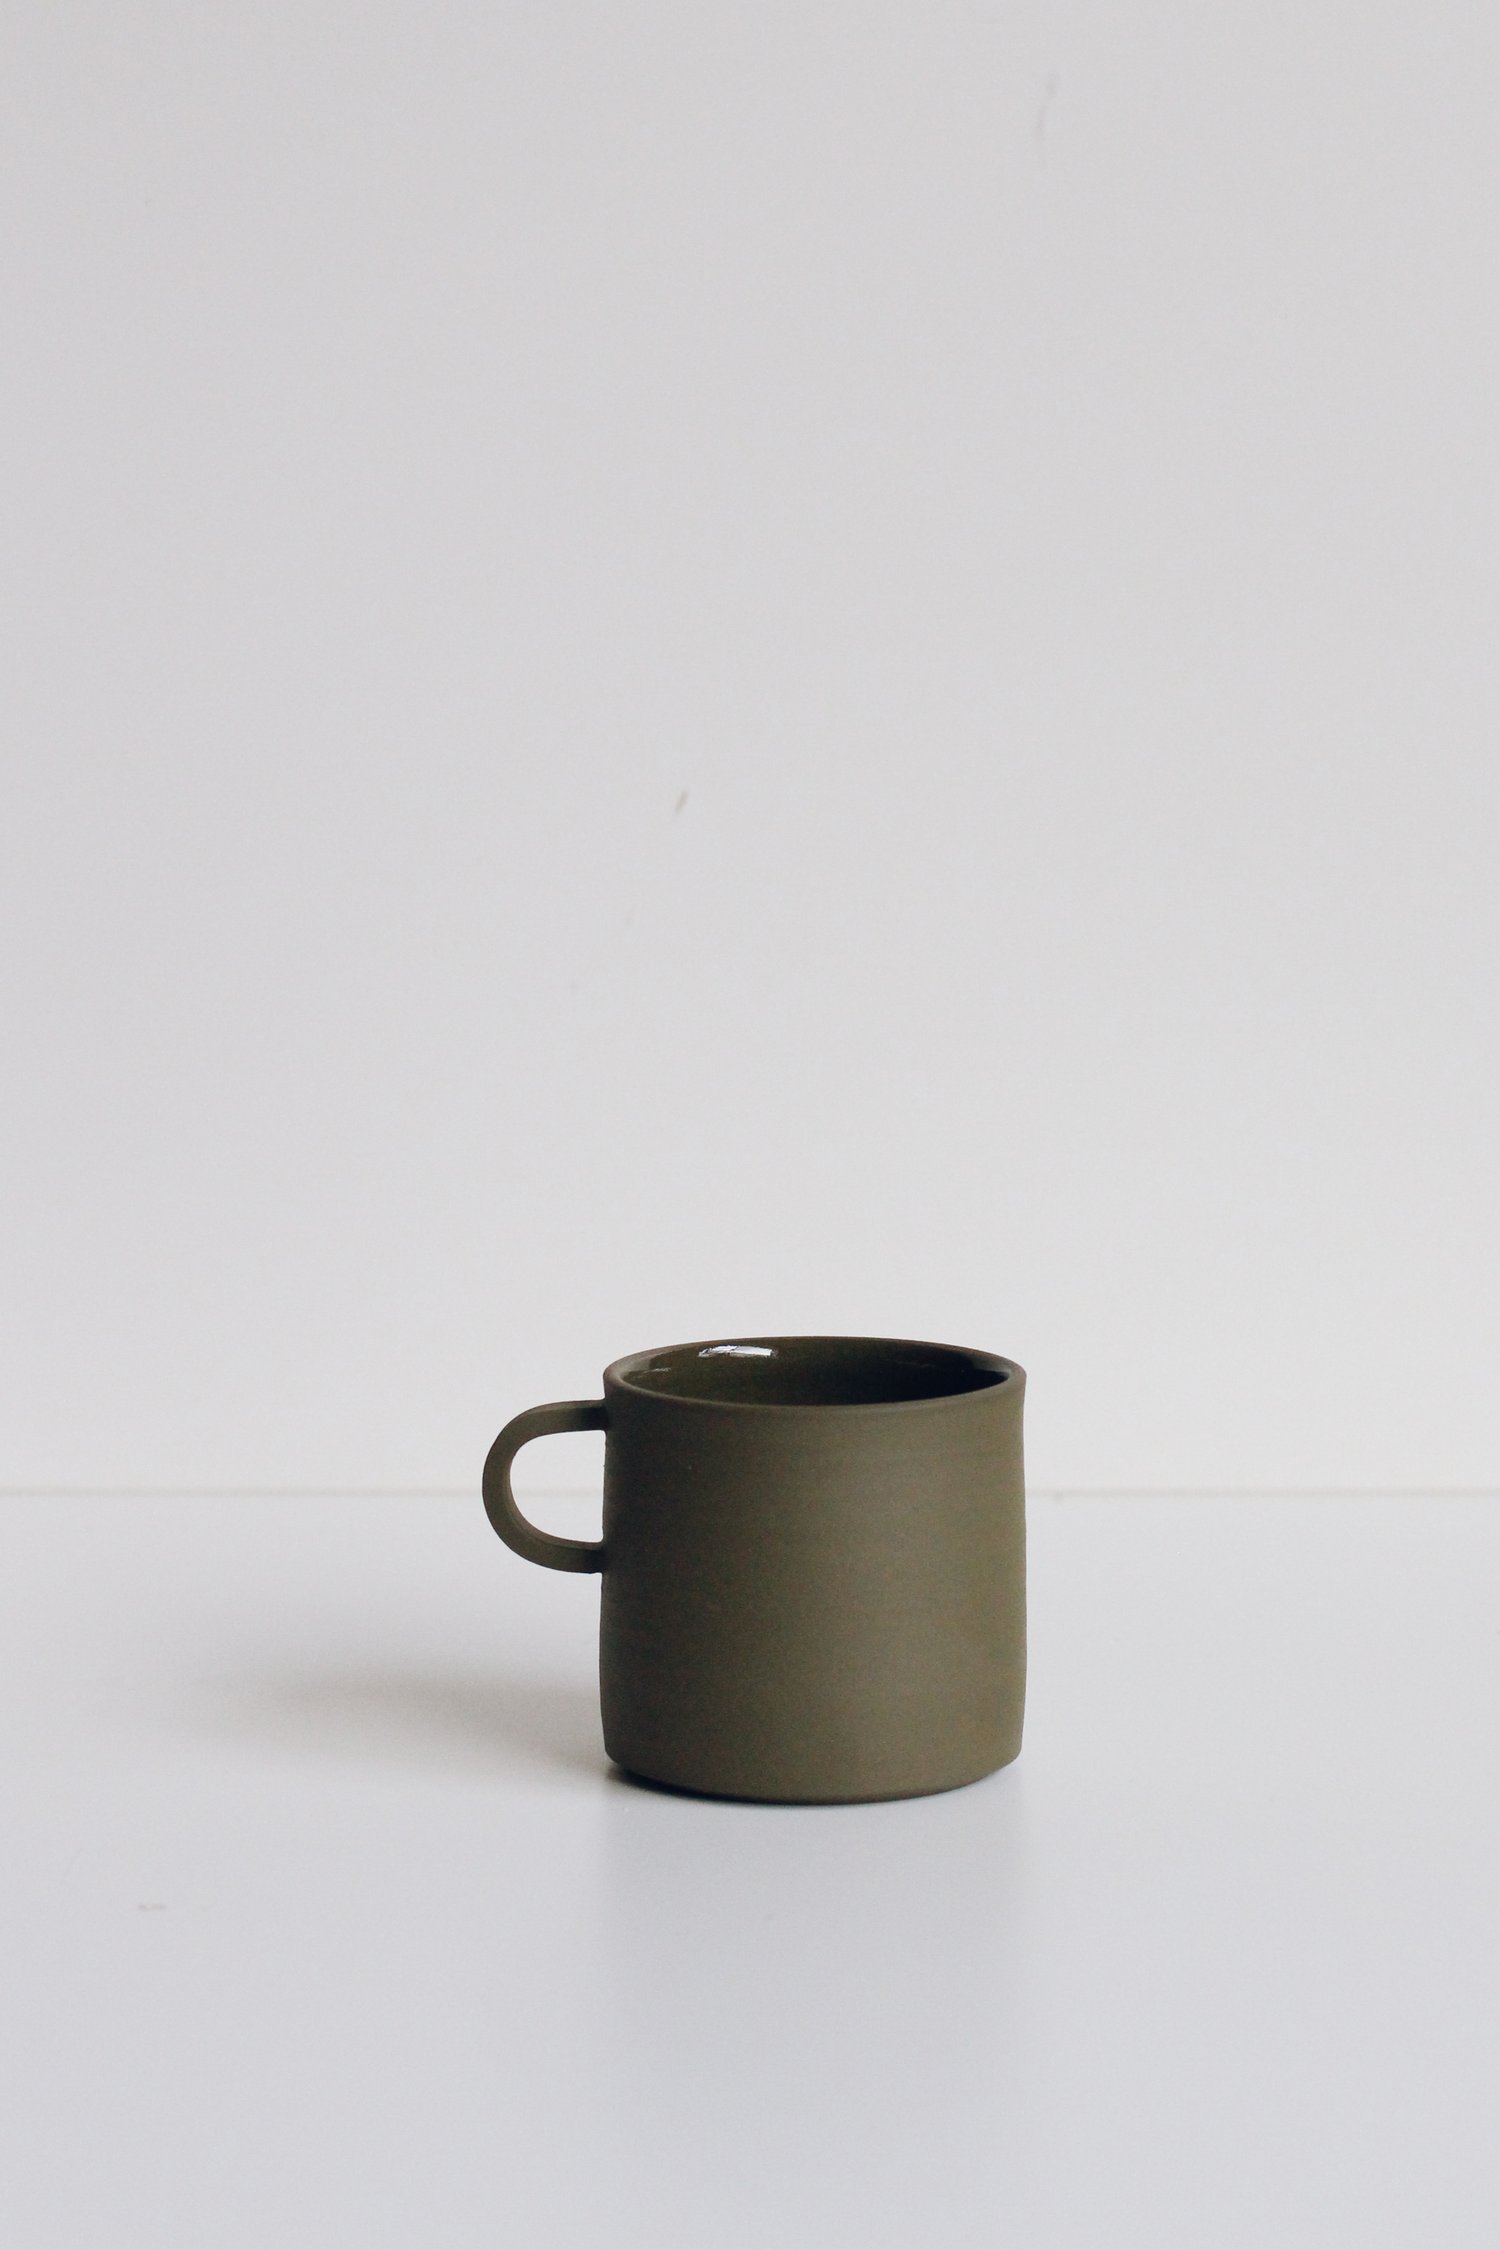 Image of Cup / Various Shades